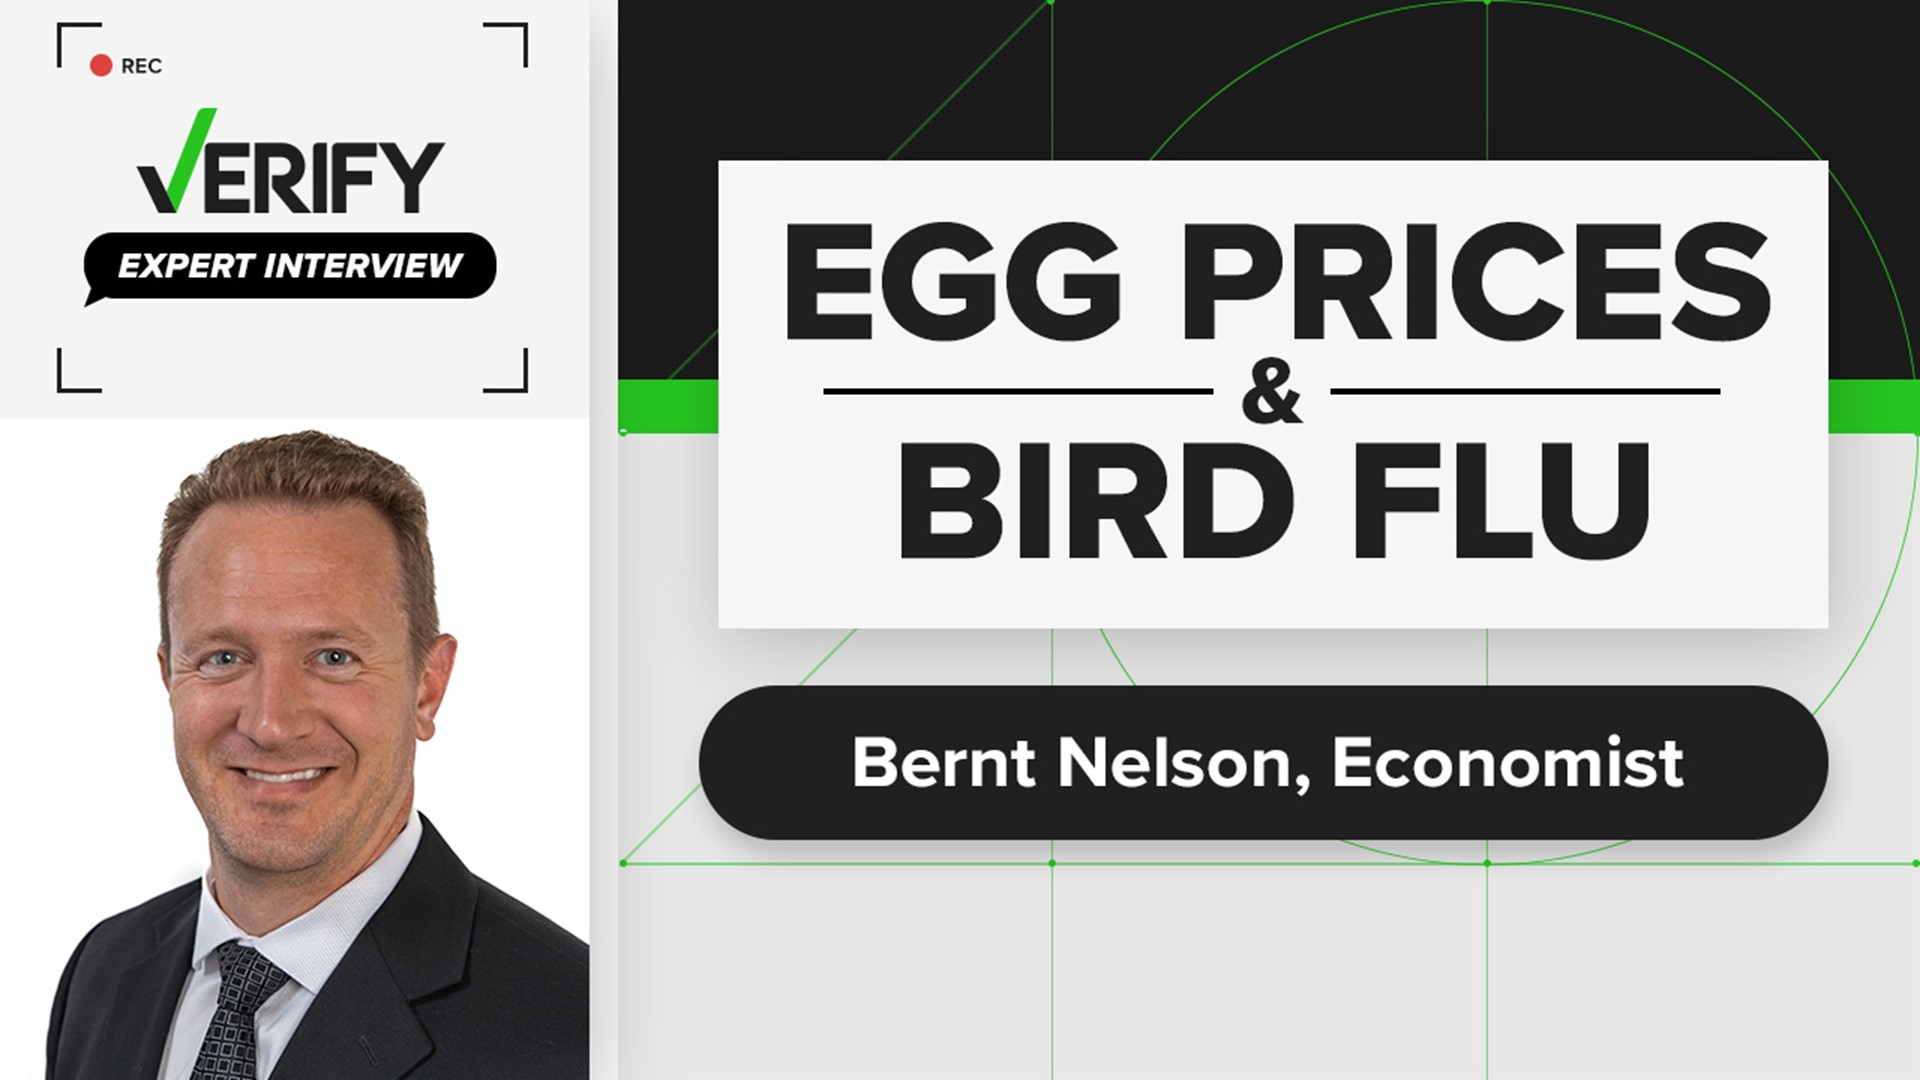 People have been having complaints about the rising cost of eggs. VERIFY expert Bernt Nelson explains how the current bird flu outbreak is contributing this.